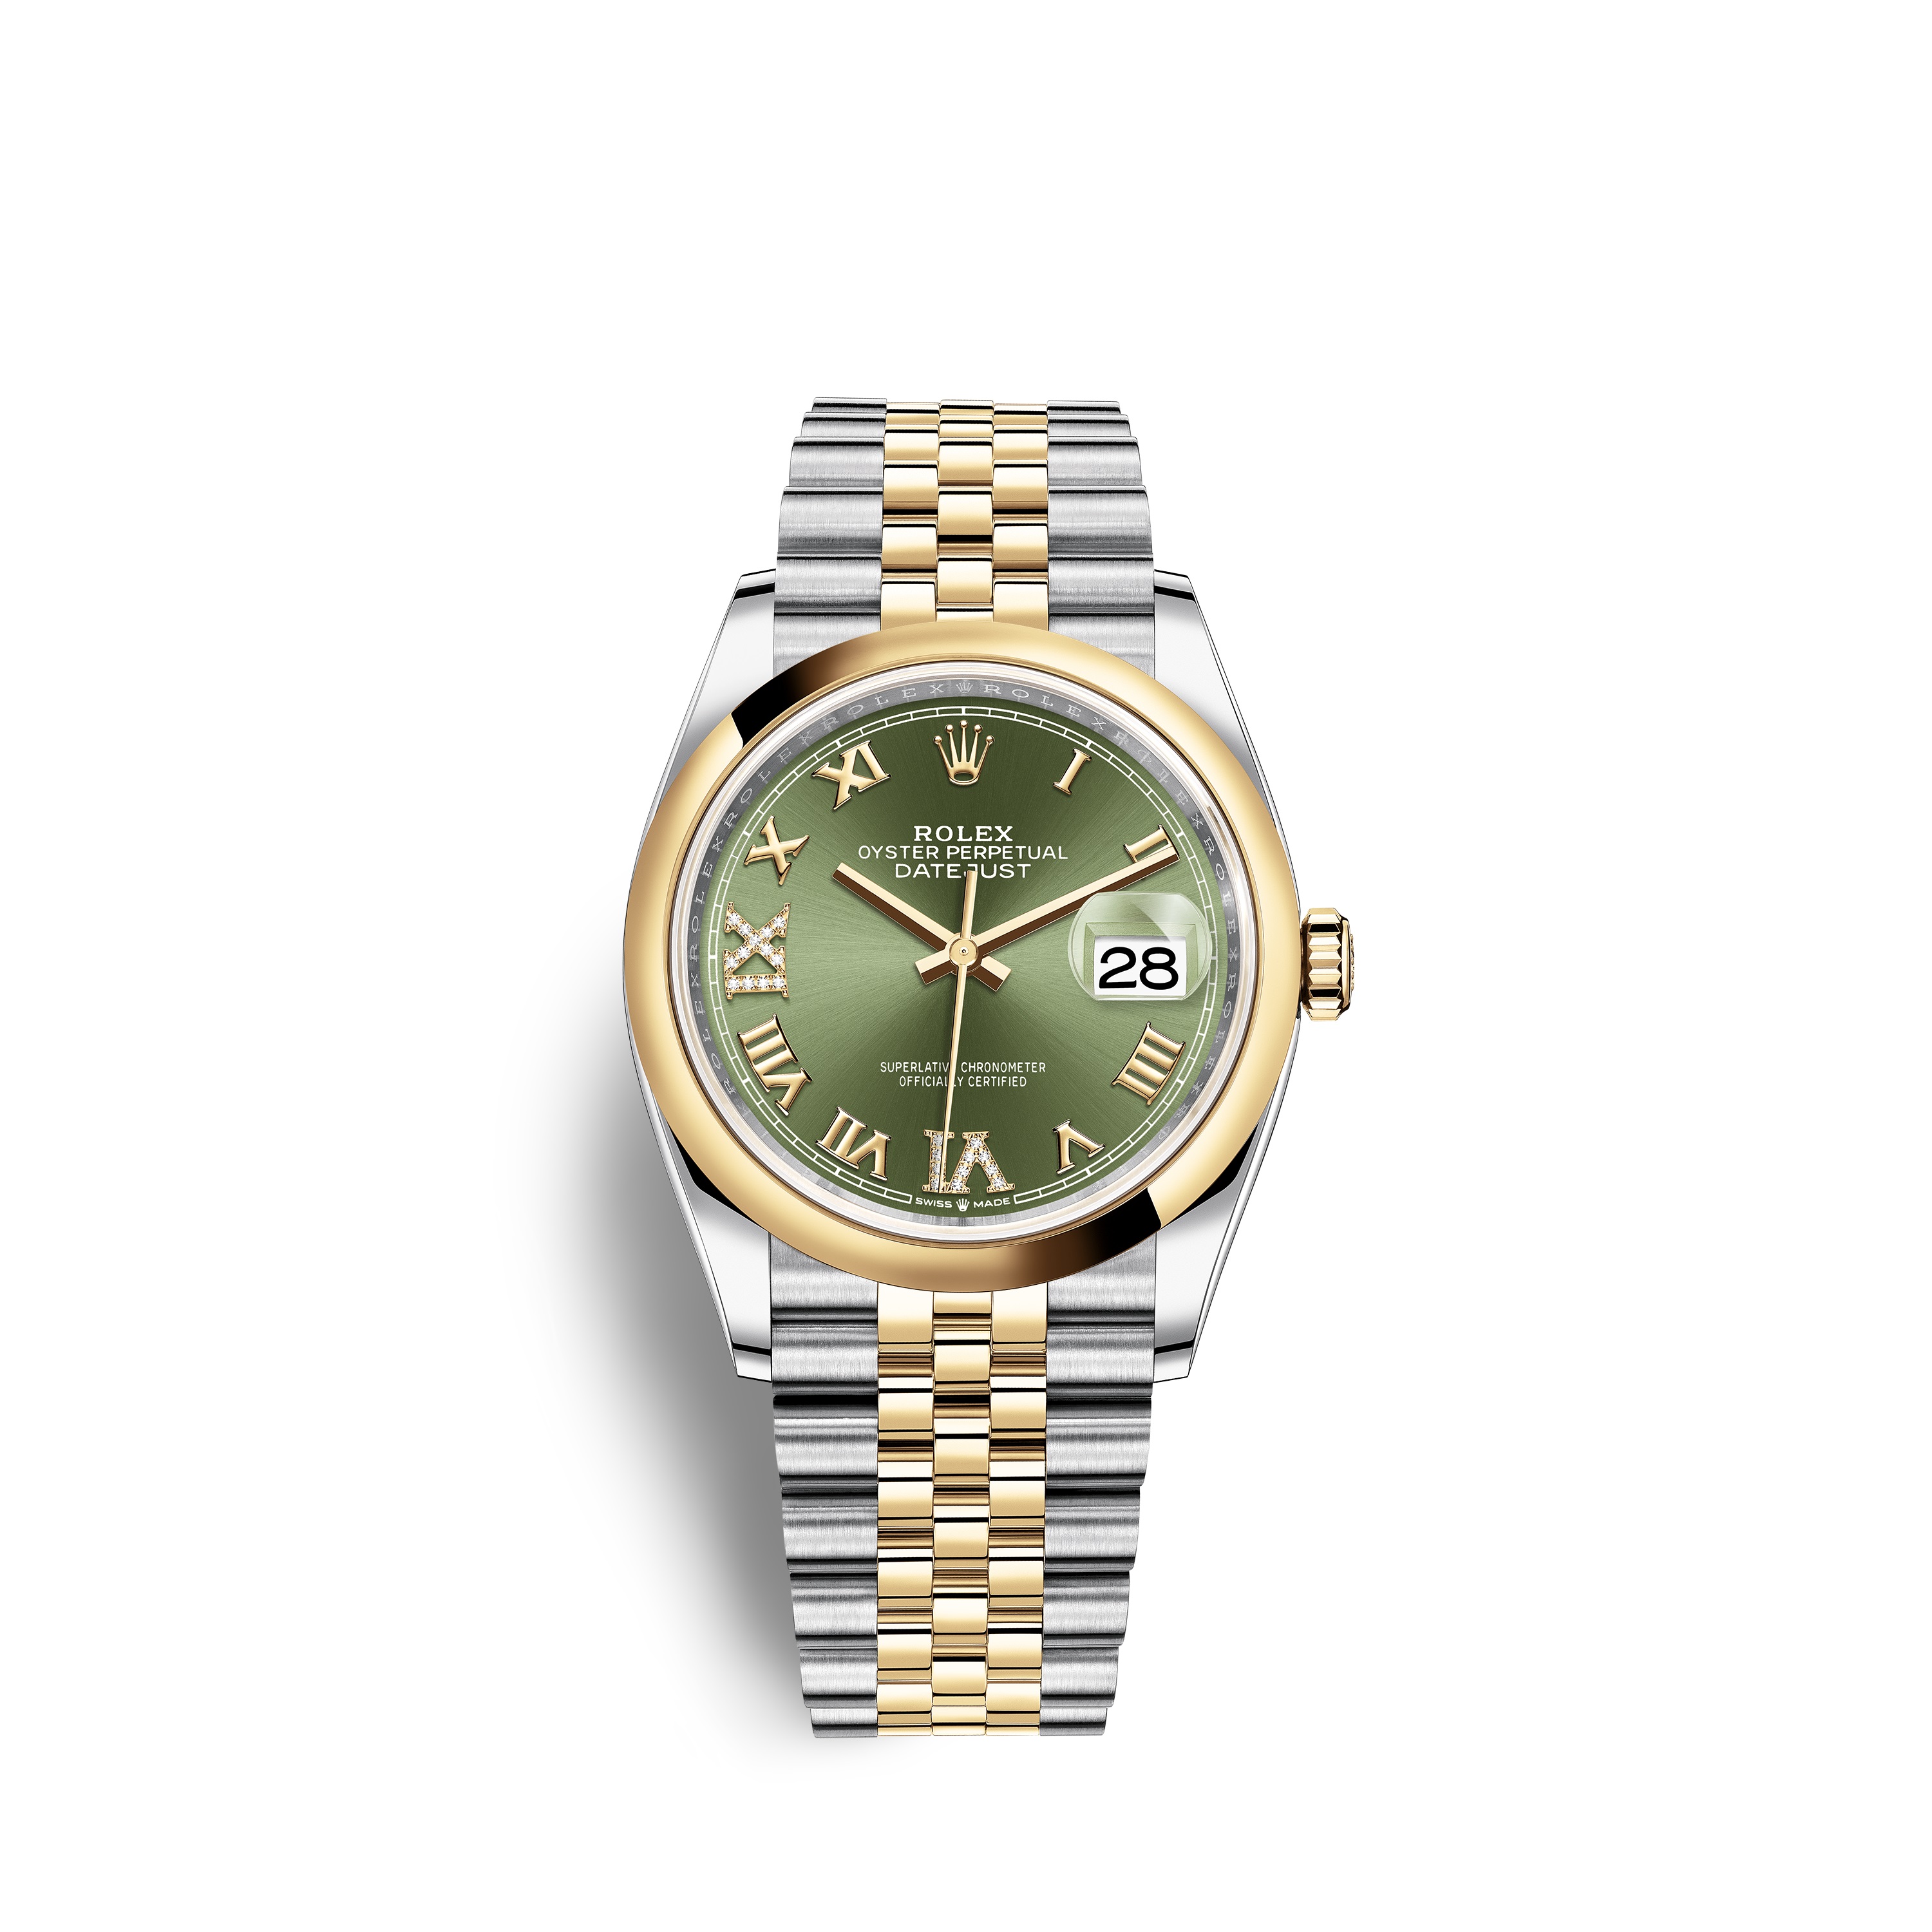 Datejust 36 126203 Gold & Stainless Steel Watch (Olive Green Set with Diamonds) - Click Image to Close